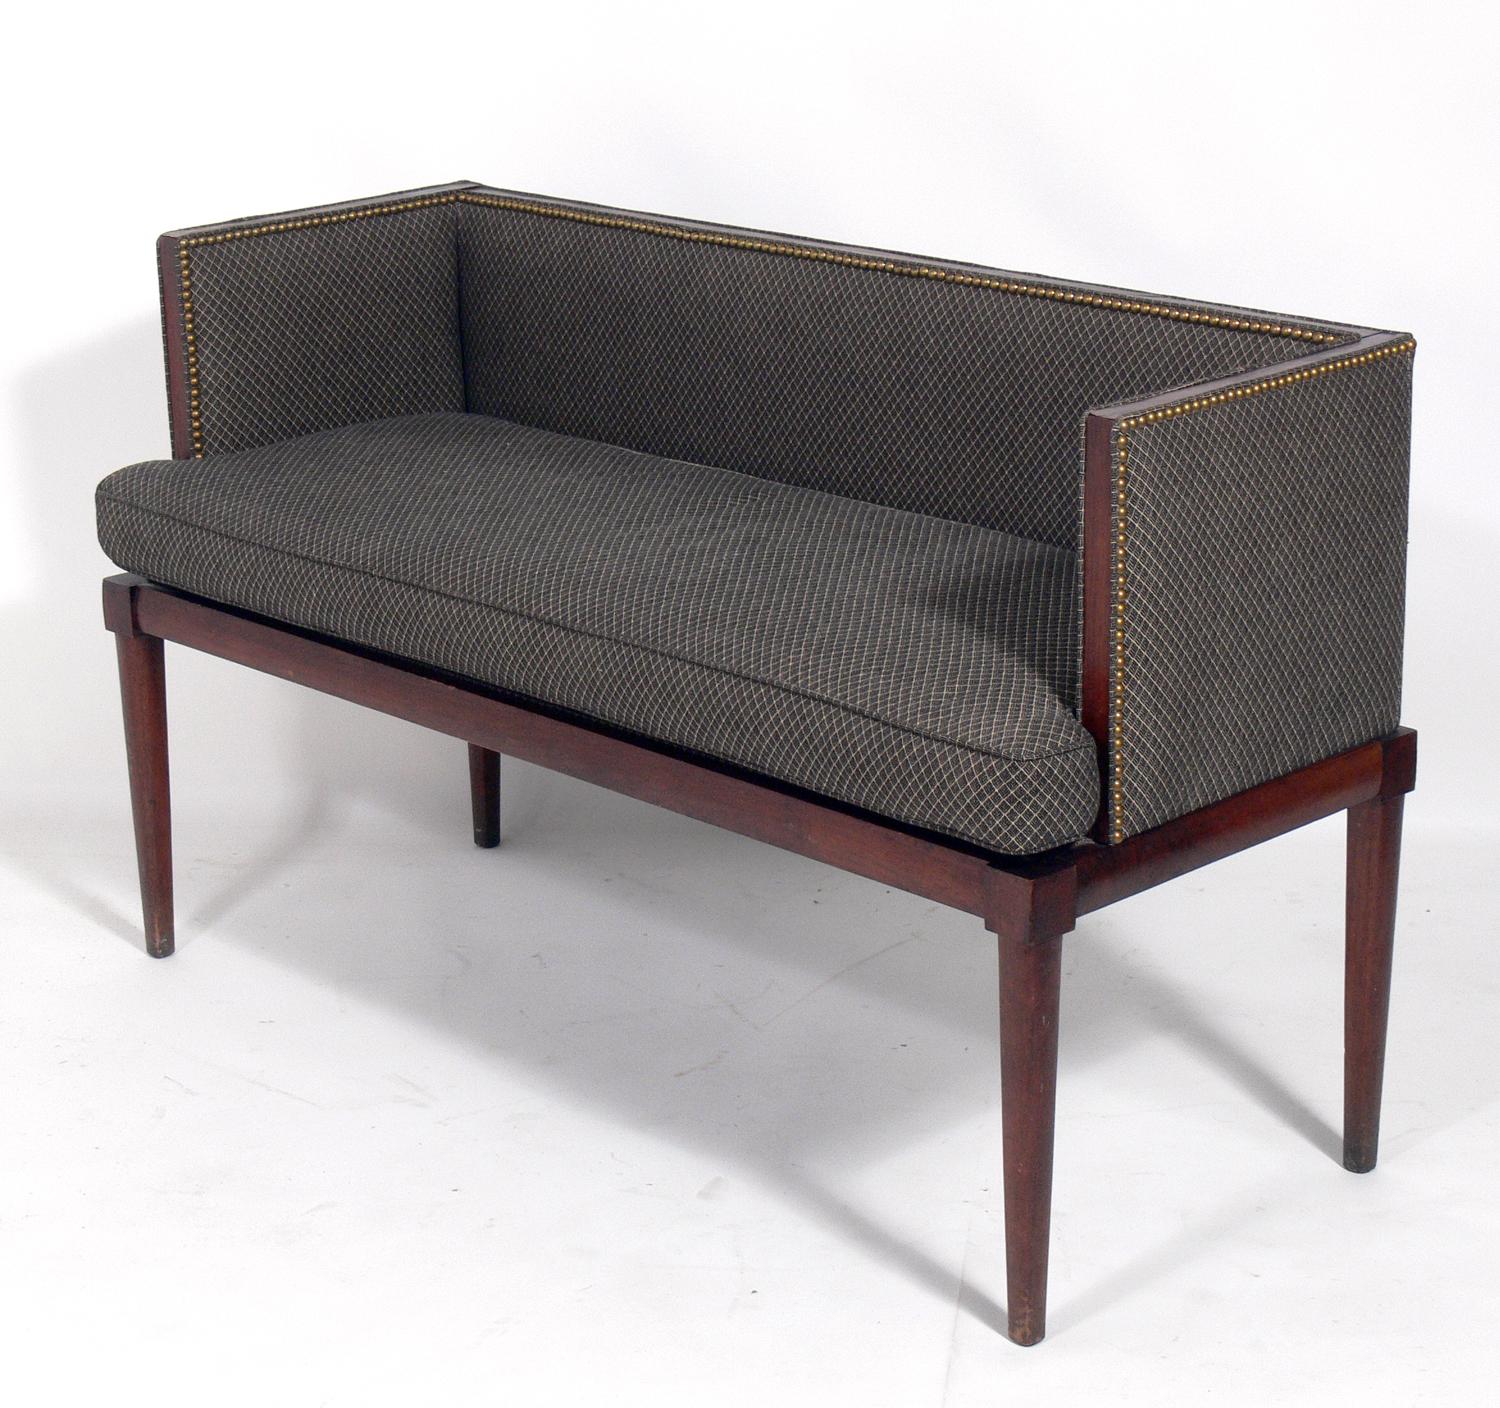 Clean lined tuxedo settee or bench, American, circa 1960s.